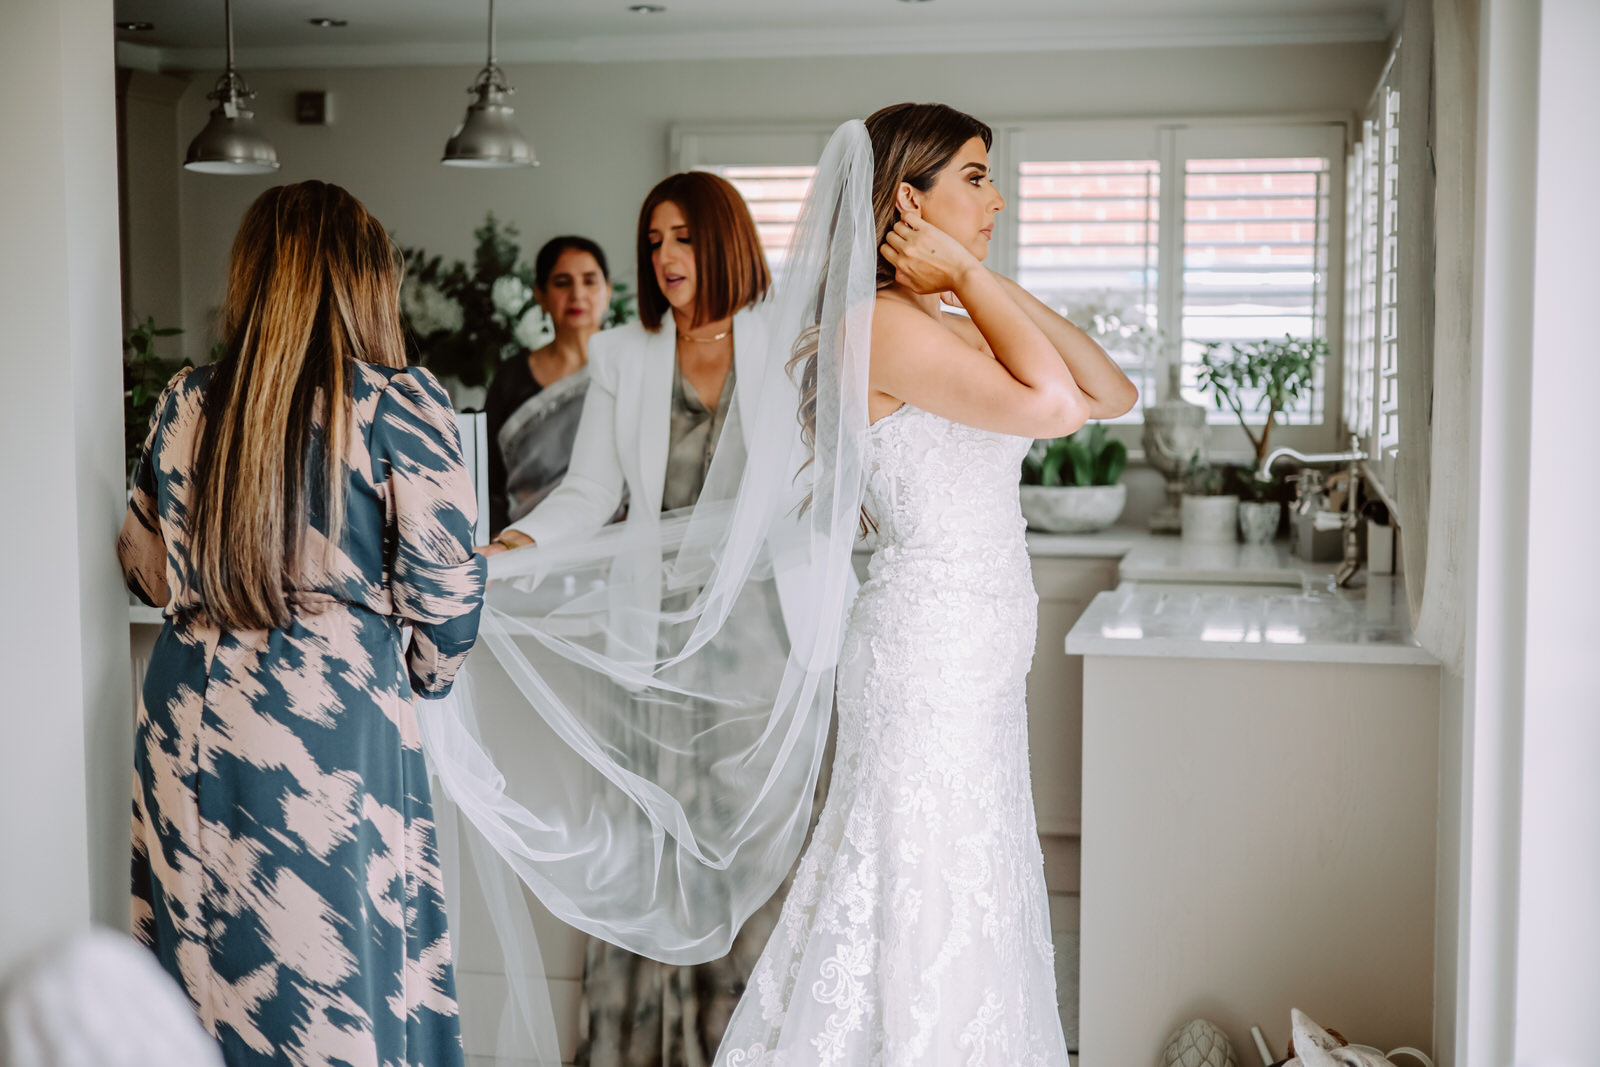 A bride getting ready in a bathroom with her bridesmaids.